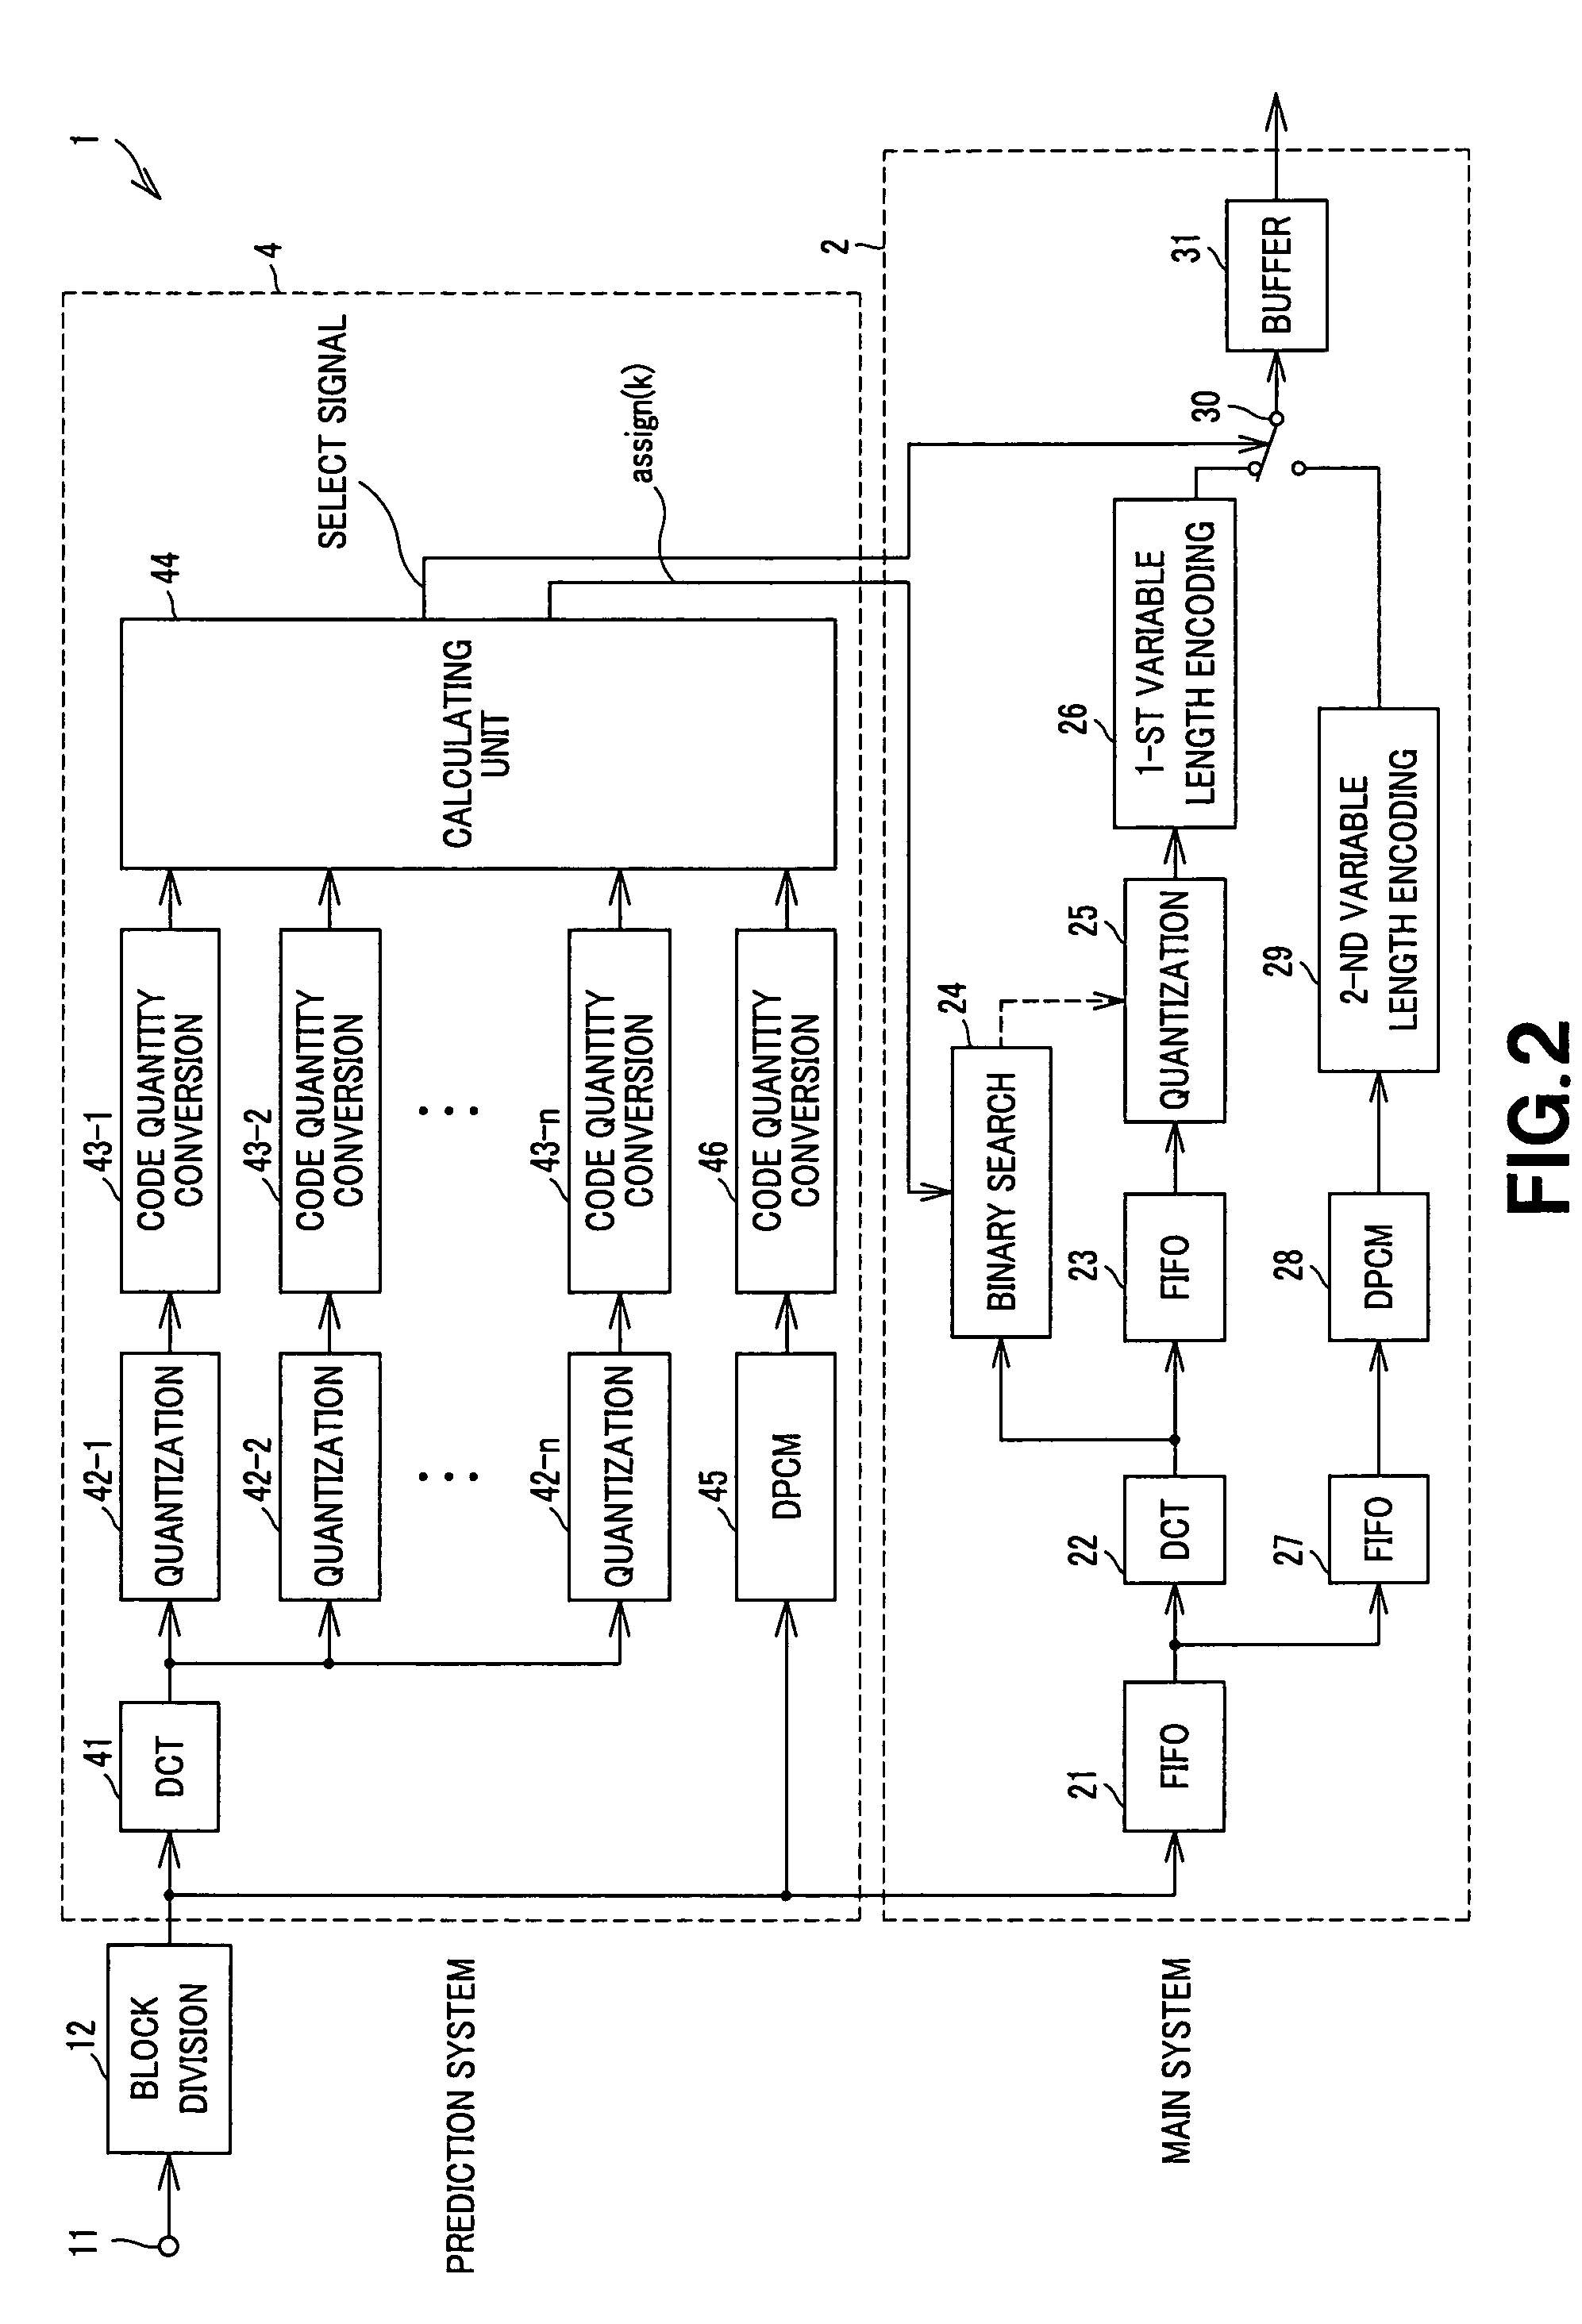 Image compression system with coding quantity control